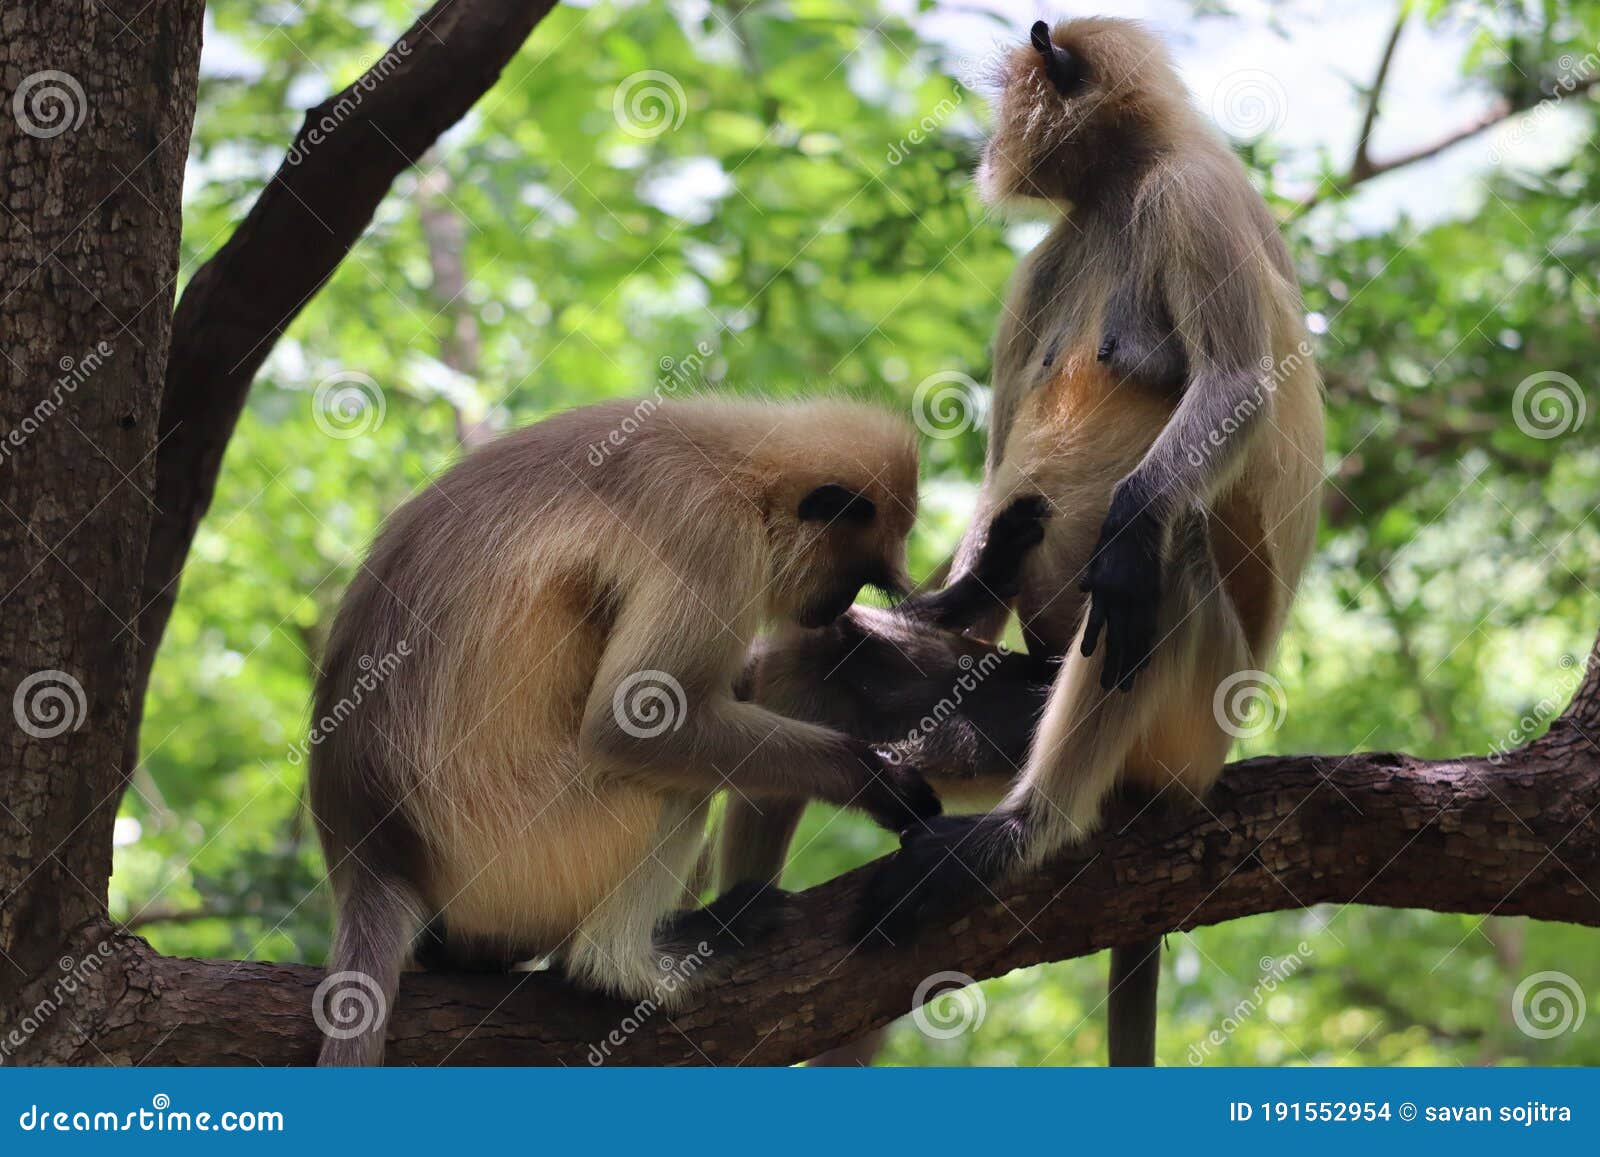 28 960 Animal Mating Photos Free Royalty Free Stock Photos From Dreamstime